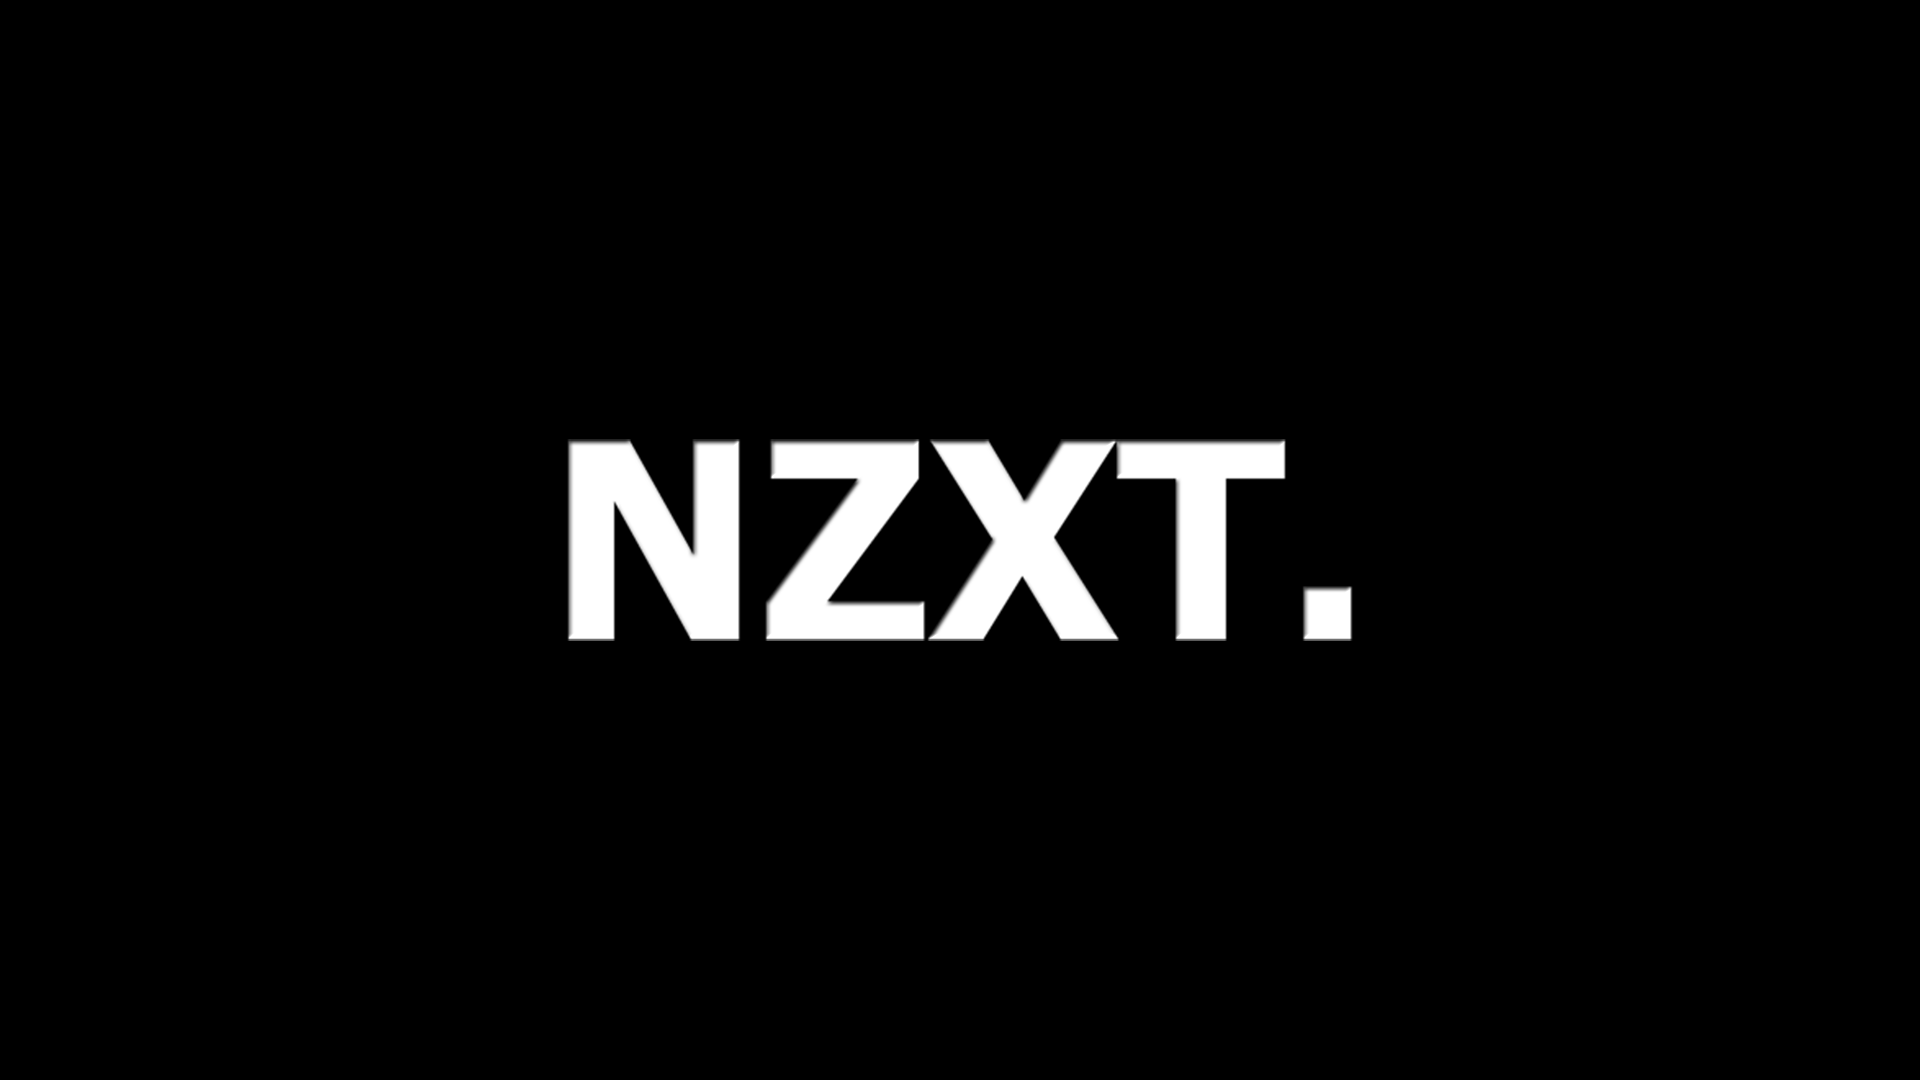 Nzxt Wallpapers.